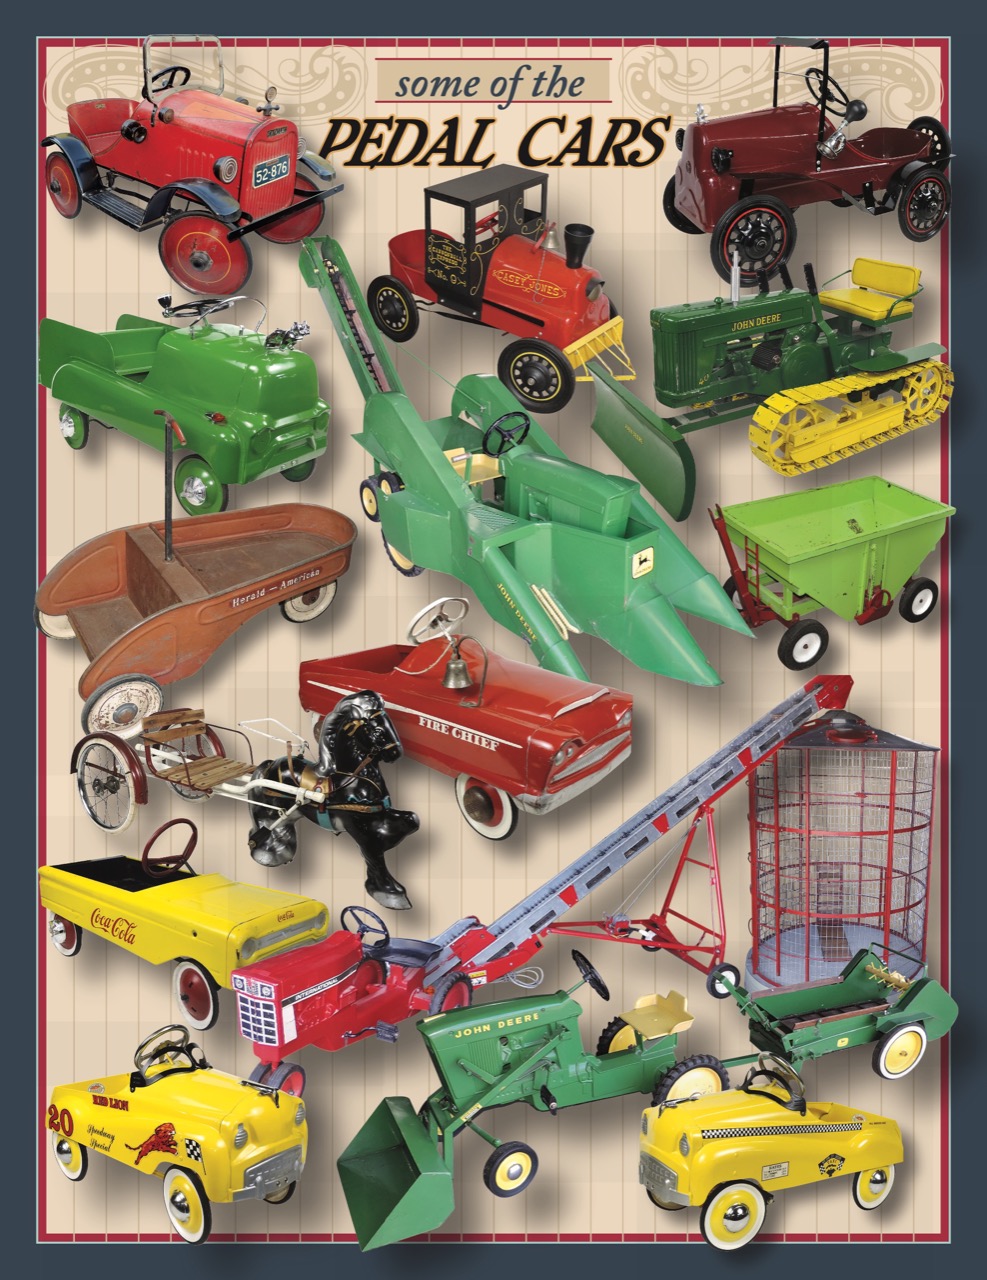 Pedal Cars Preview Image